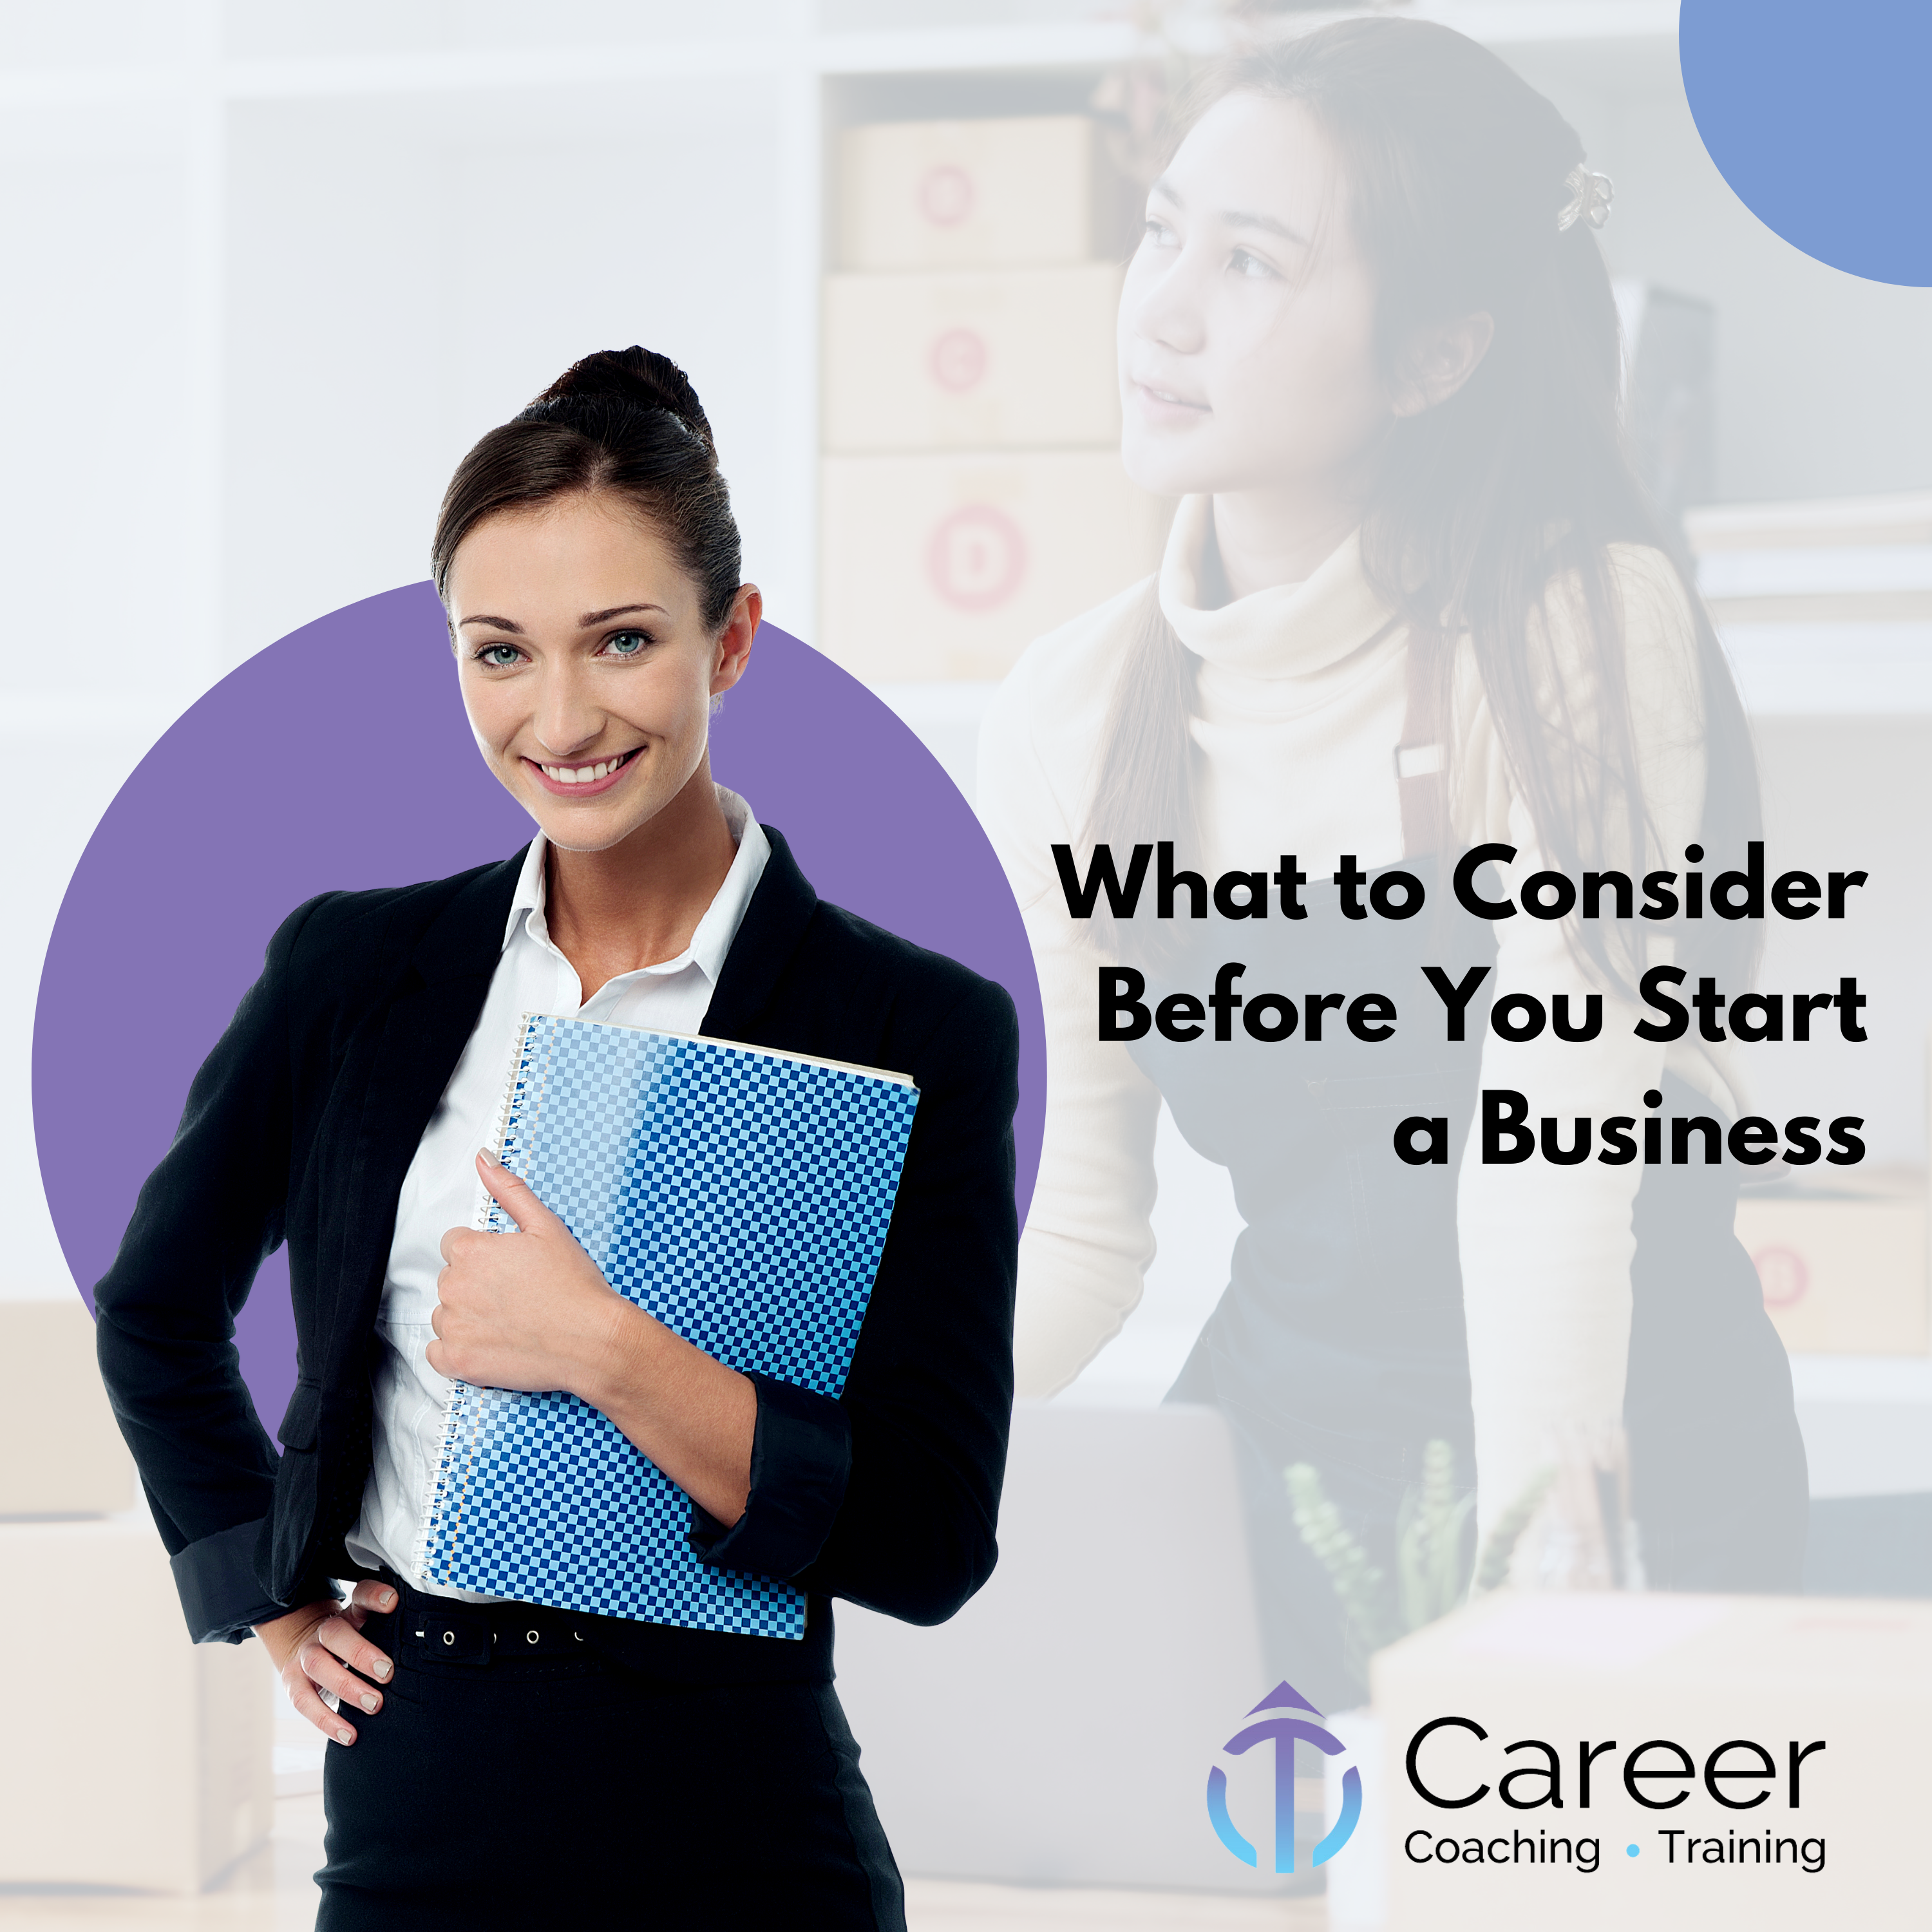 What to Consider before You Start a Business